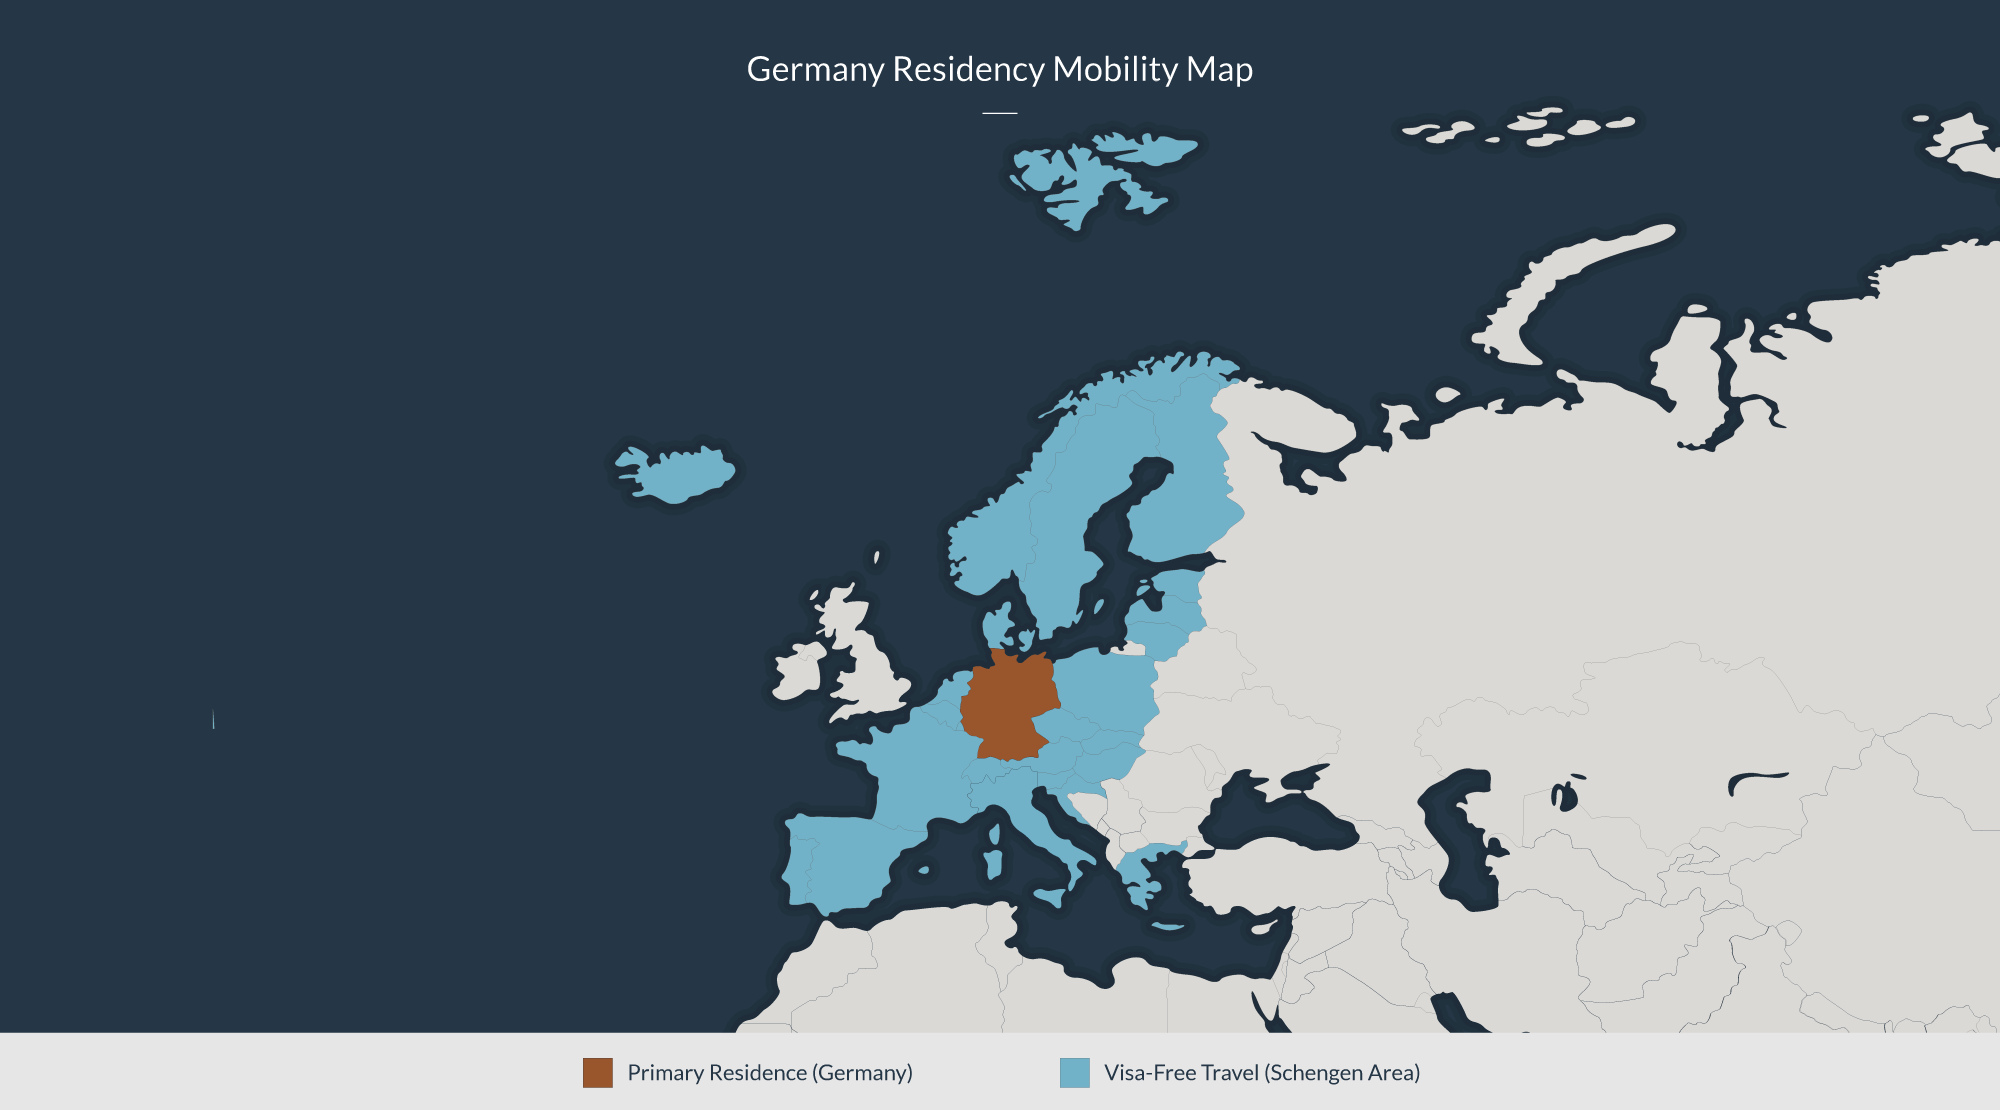 Germany residency mobility map: Primary residence in Germany, Visa-free travel across the Schengen area.